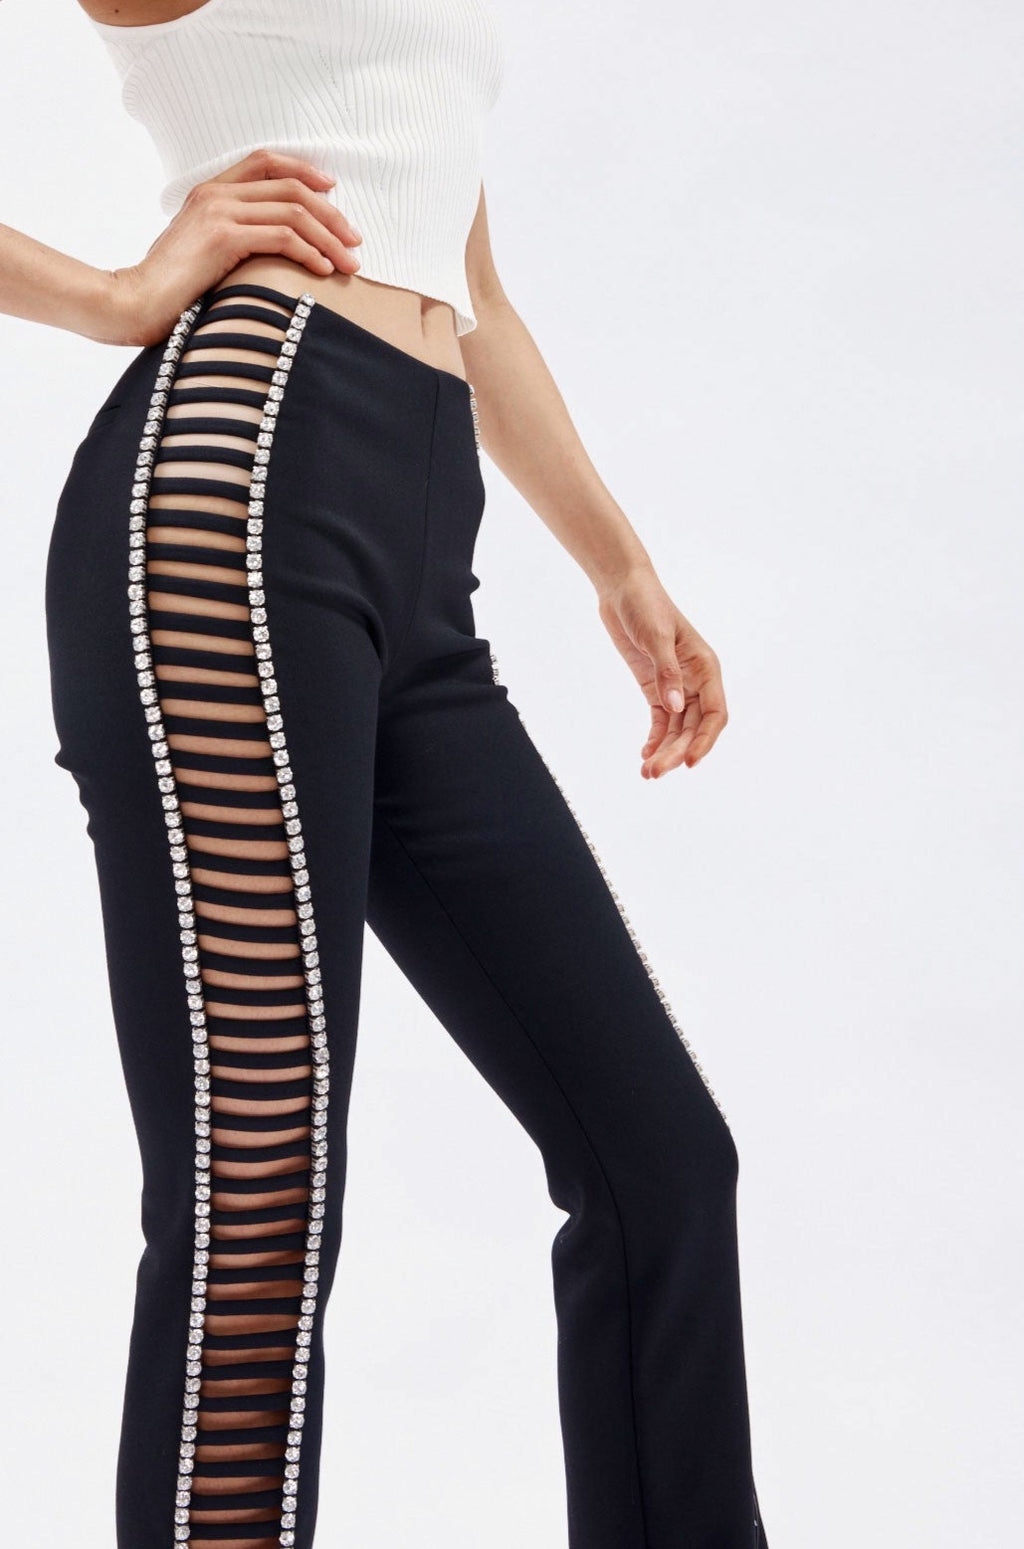 Slim Black Pant with Cage Strap Cutout